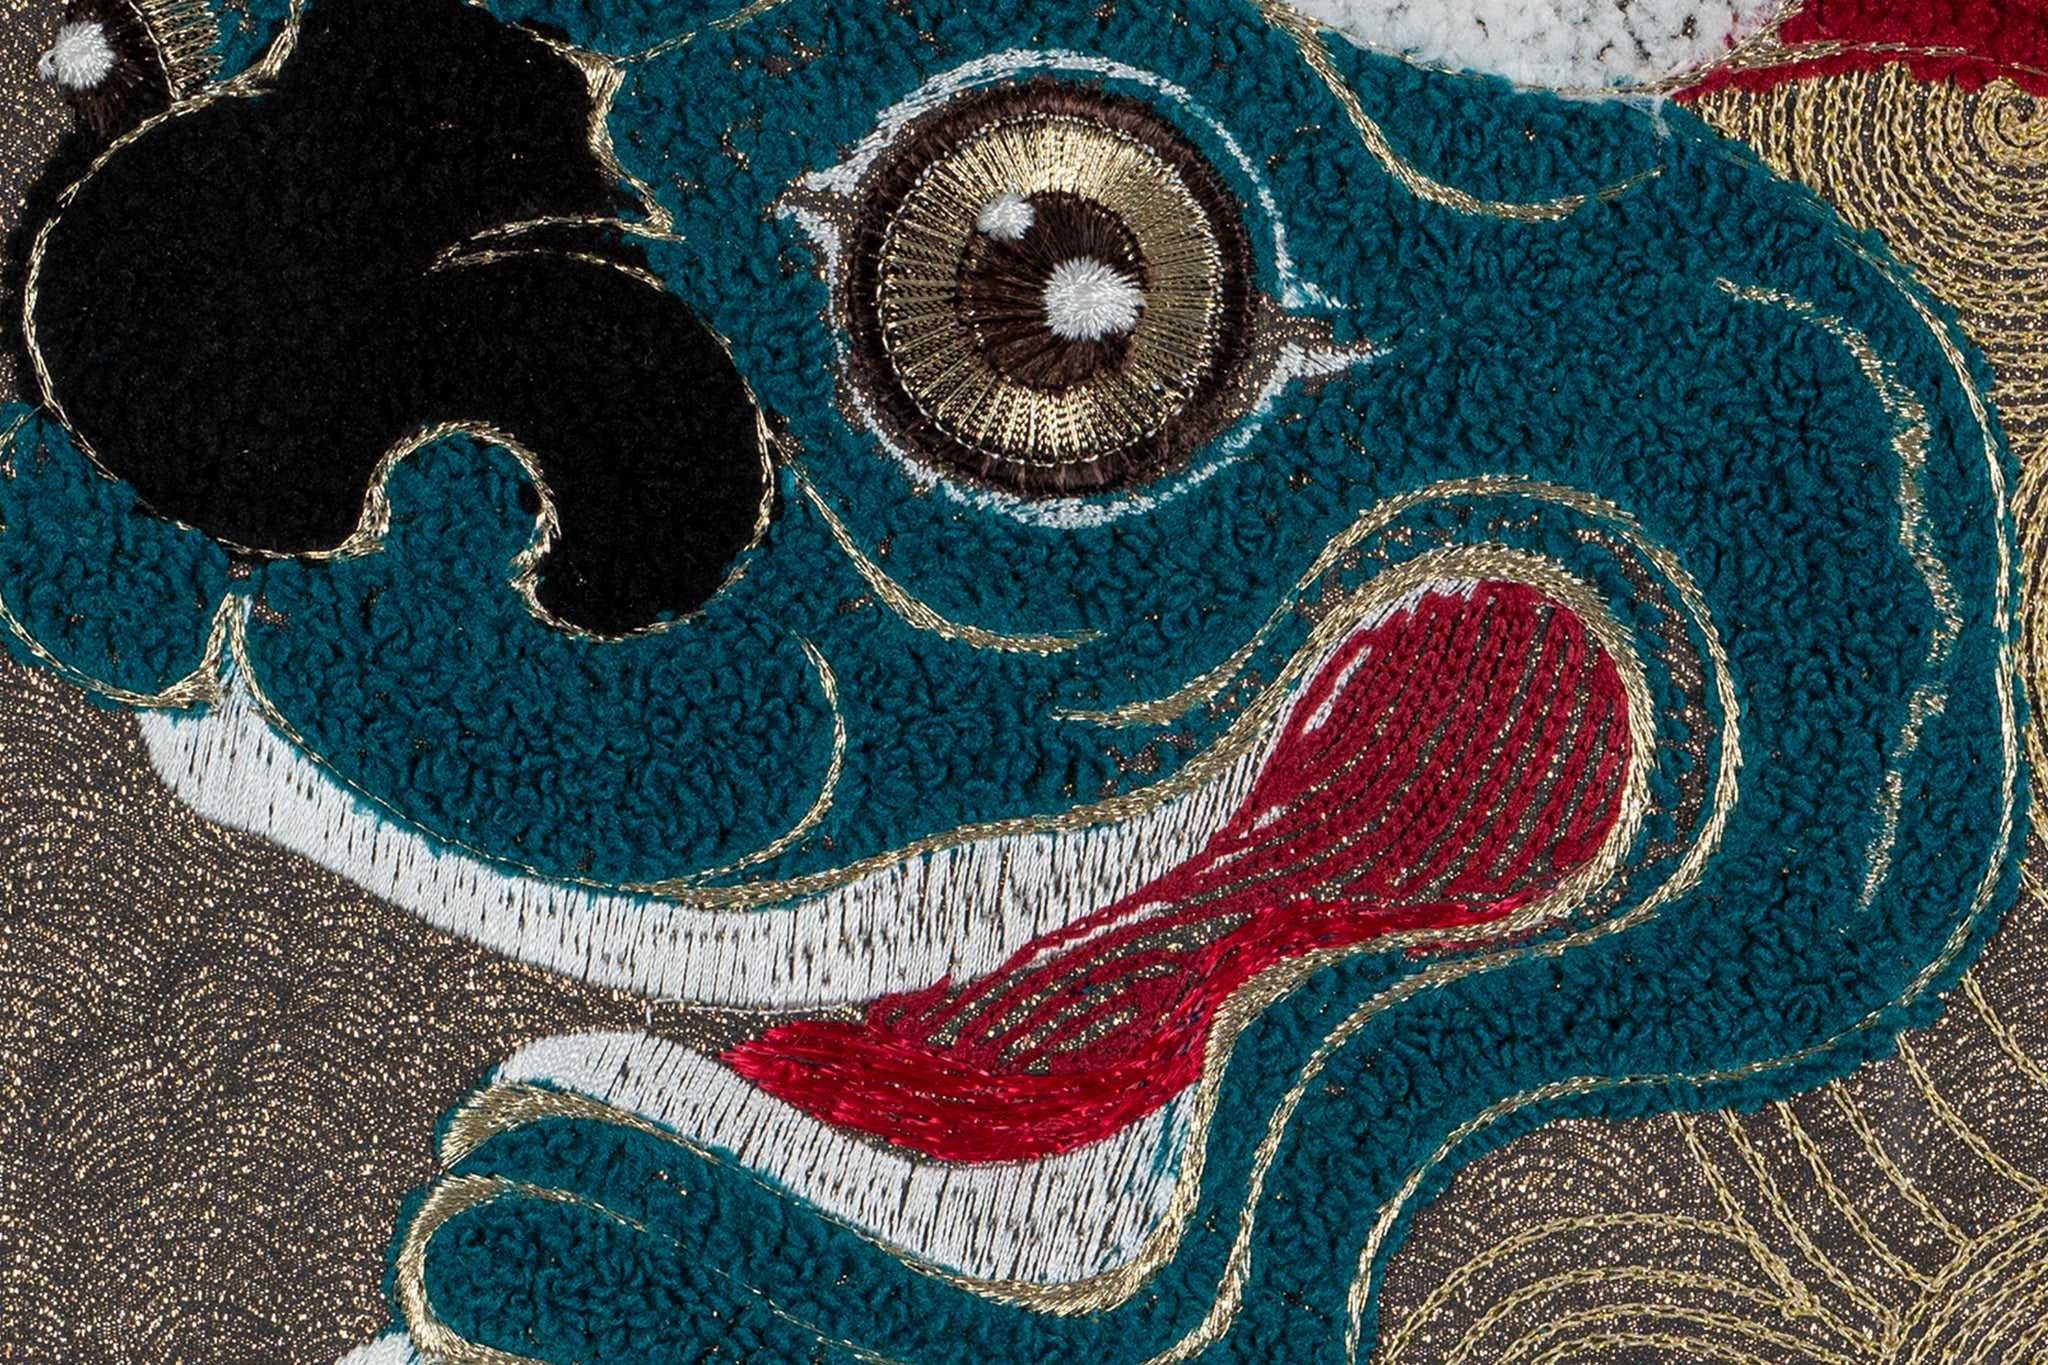 Close-up of framed embroidery artwork highlighting the lion design with detailed eye and fur elements.